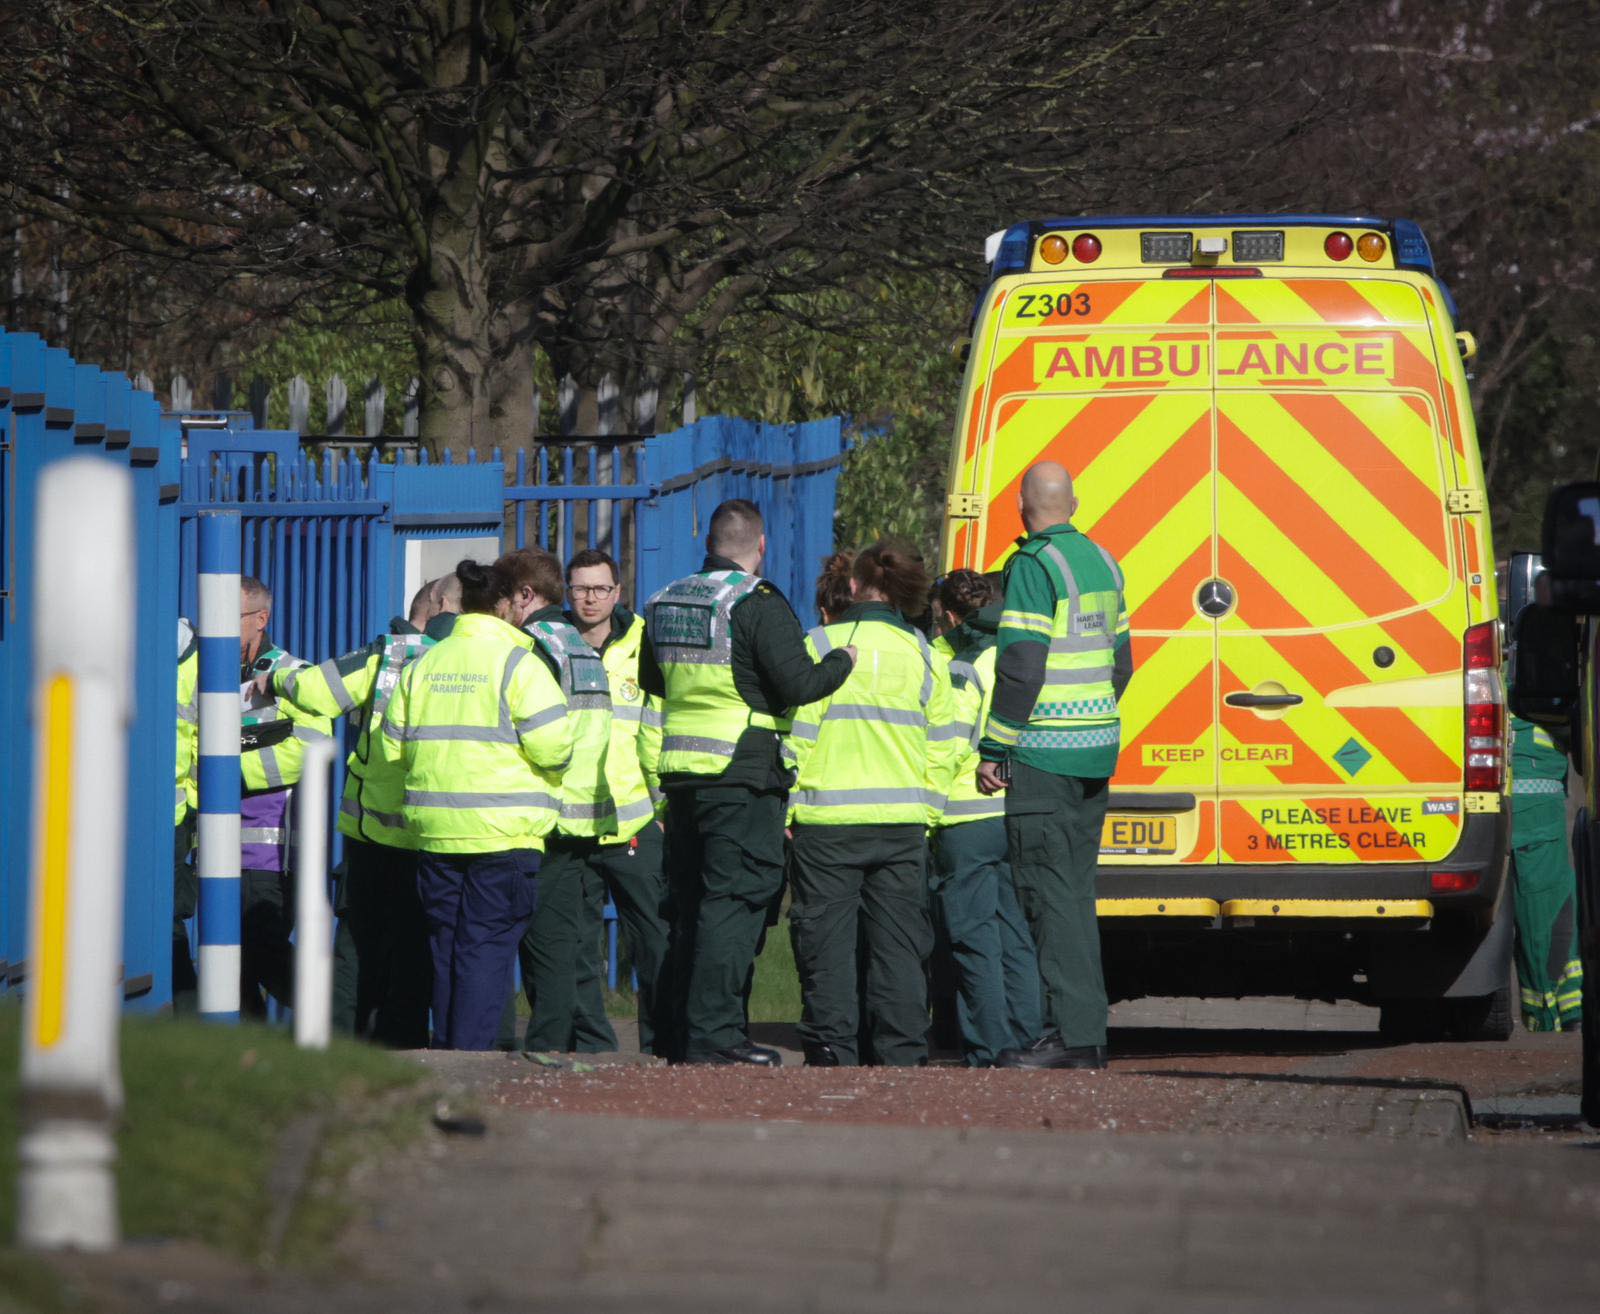 Police have ordered a lockdown following reports of a chemical leak and major “hazmat incident” in a Manchester business park